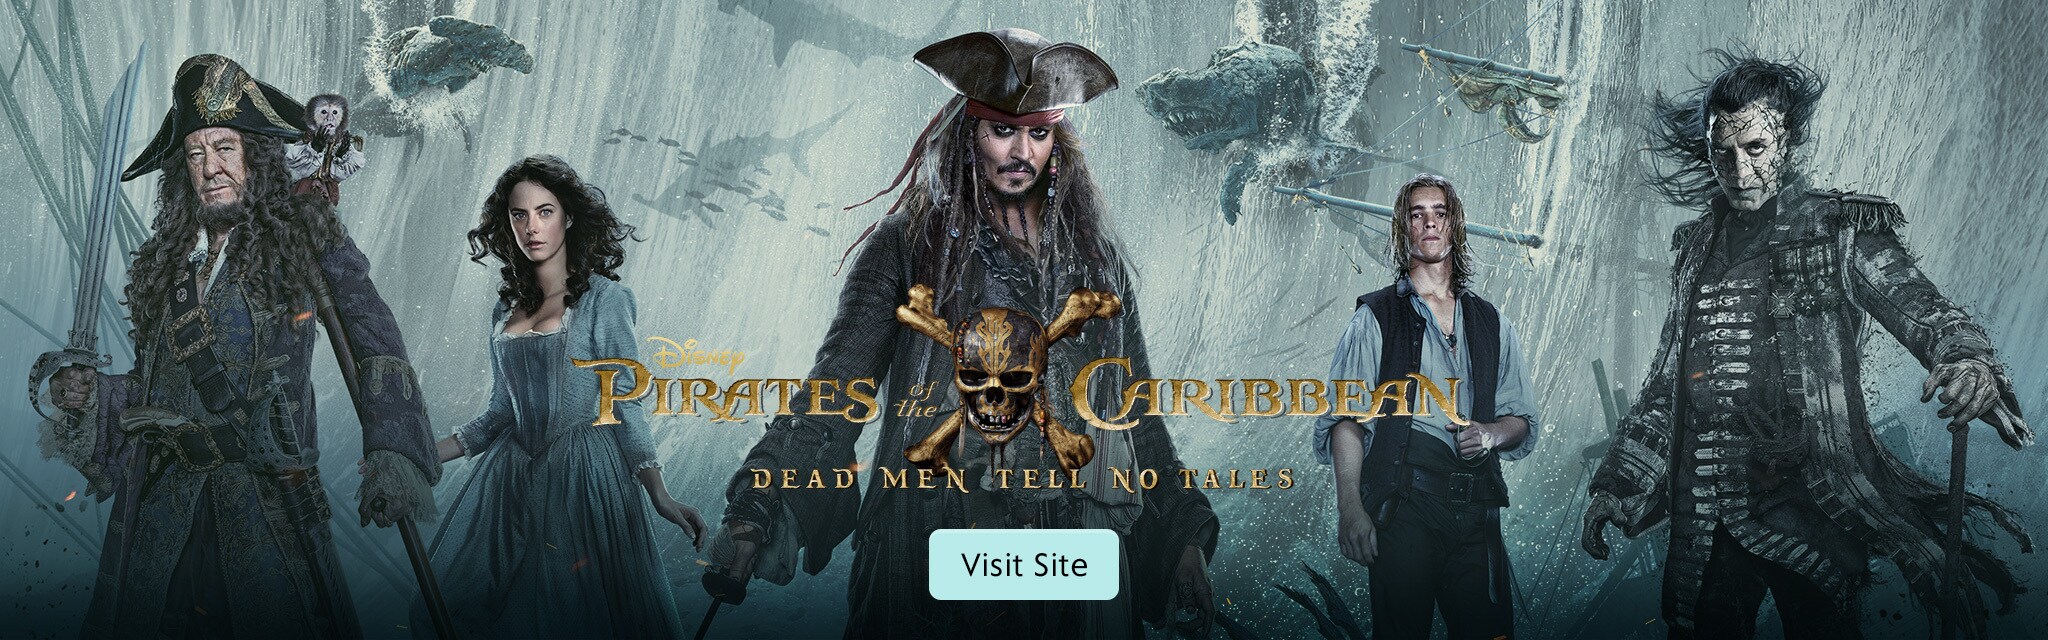 Visit the Pirates of the Caribbean: Dead Men Tell No Tales site